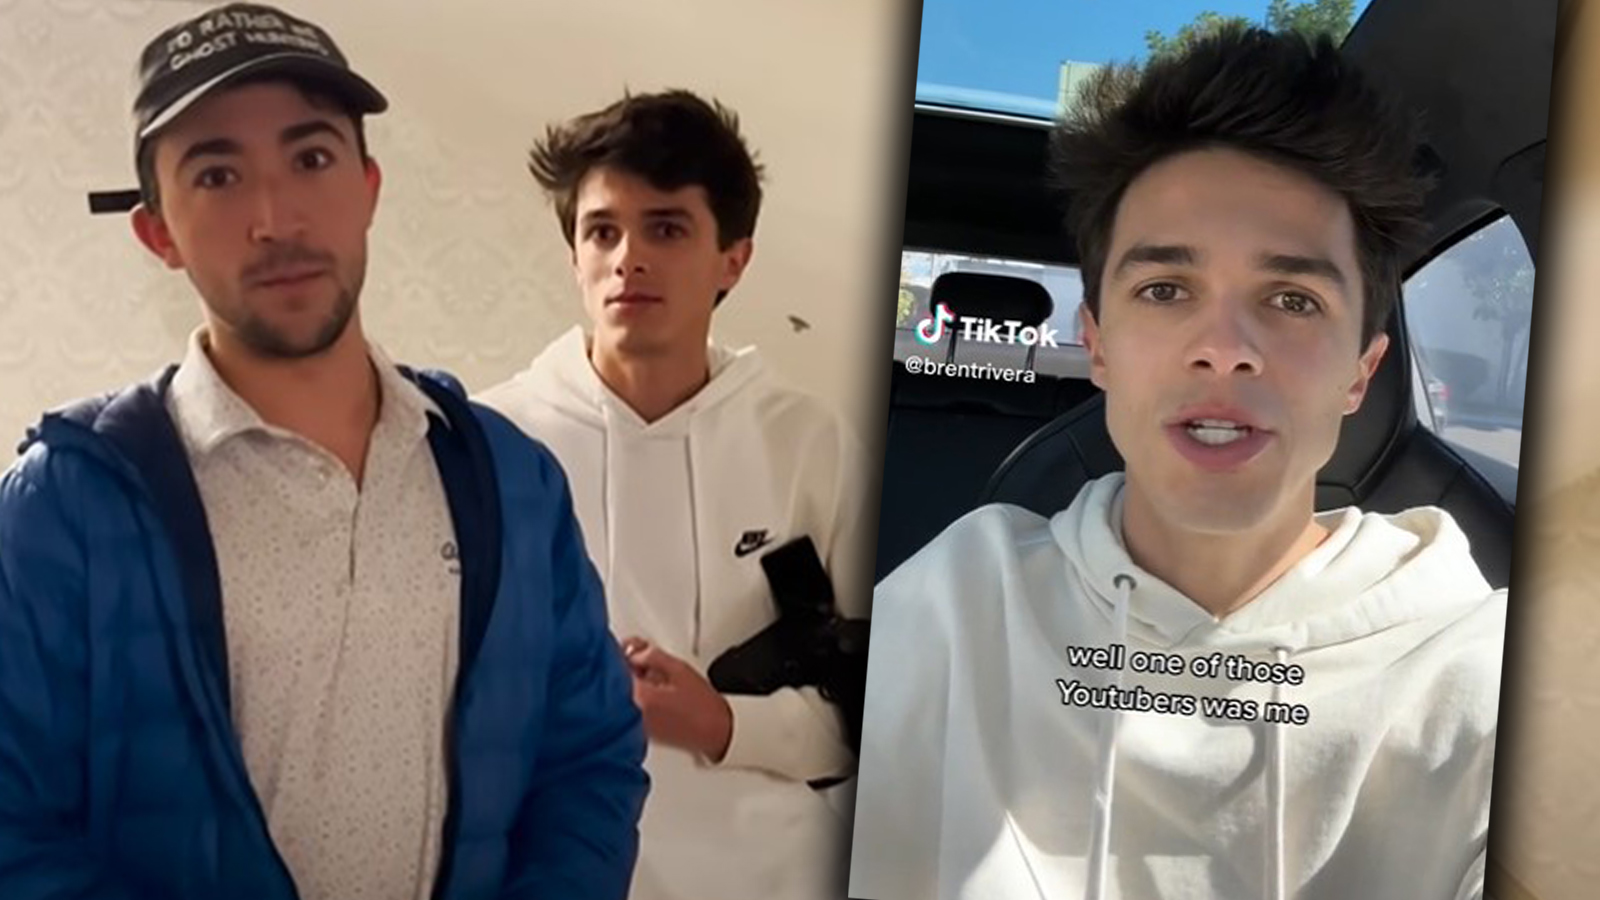 Brent Rivera apologizes after with YouTuber over “fake” pranks in viral video - Dexerto